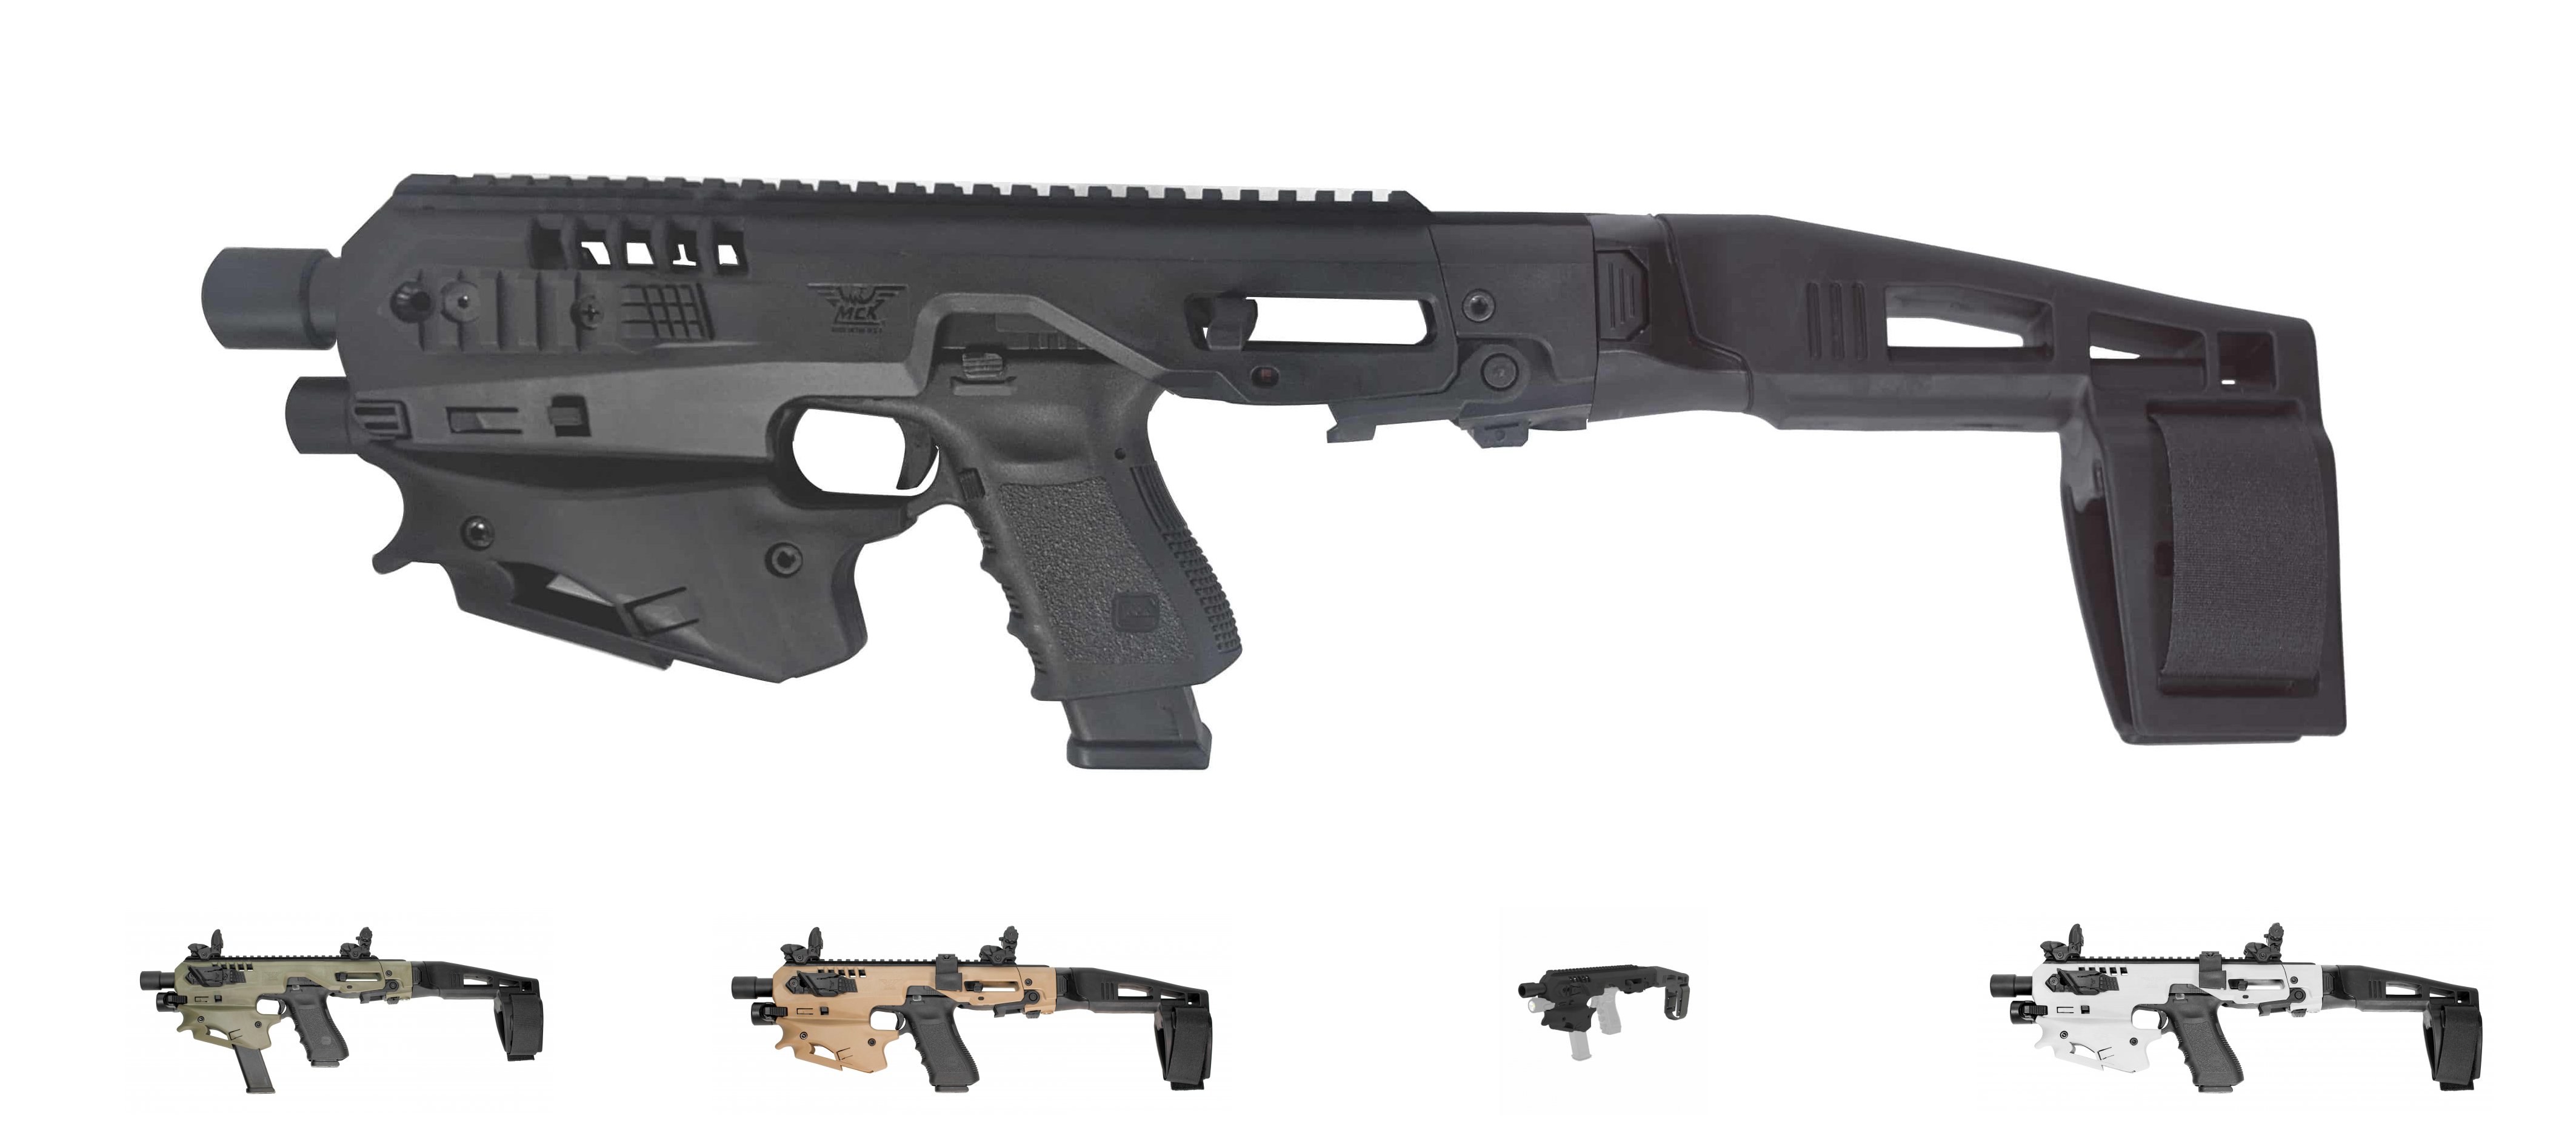 Turn your pistol into a powerhouse in the field by installing this CAA Smit...